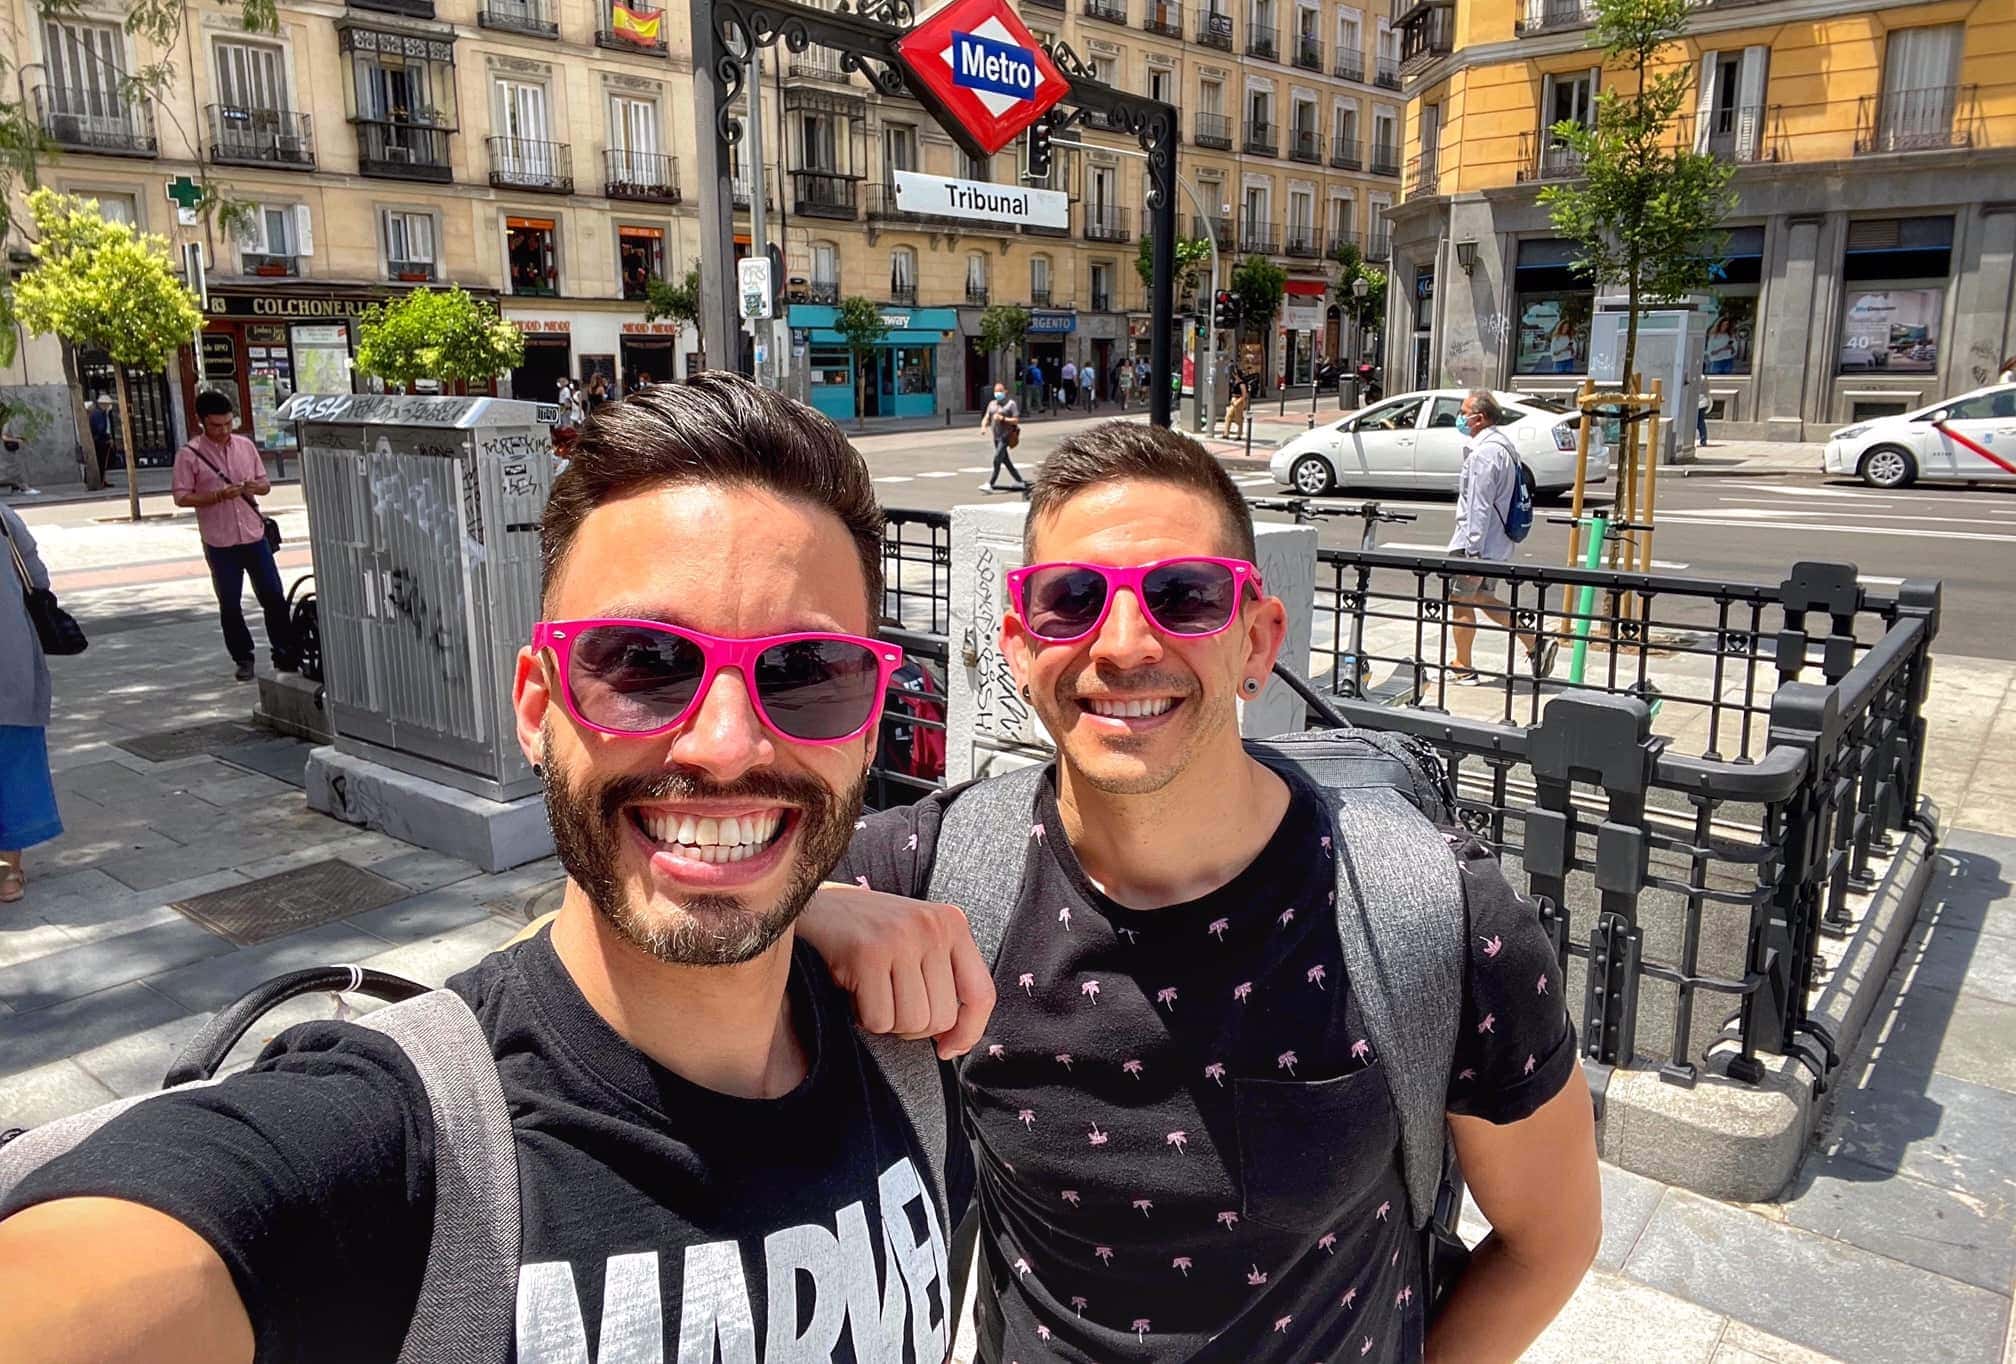 Madrid Gay Bars and Clubs: Chueca Gay Guide - The Globetrotter Guys